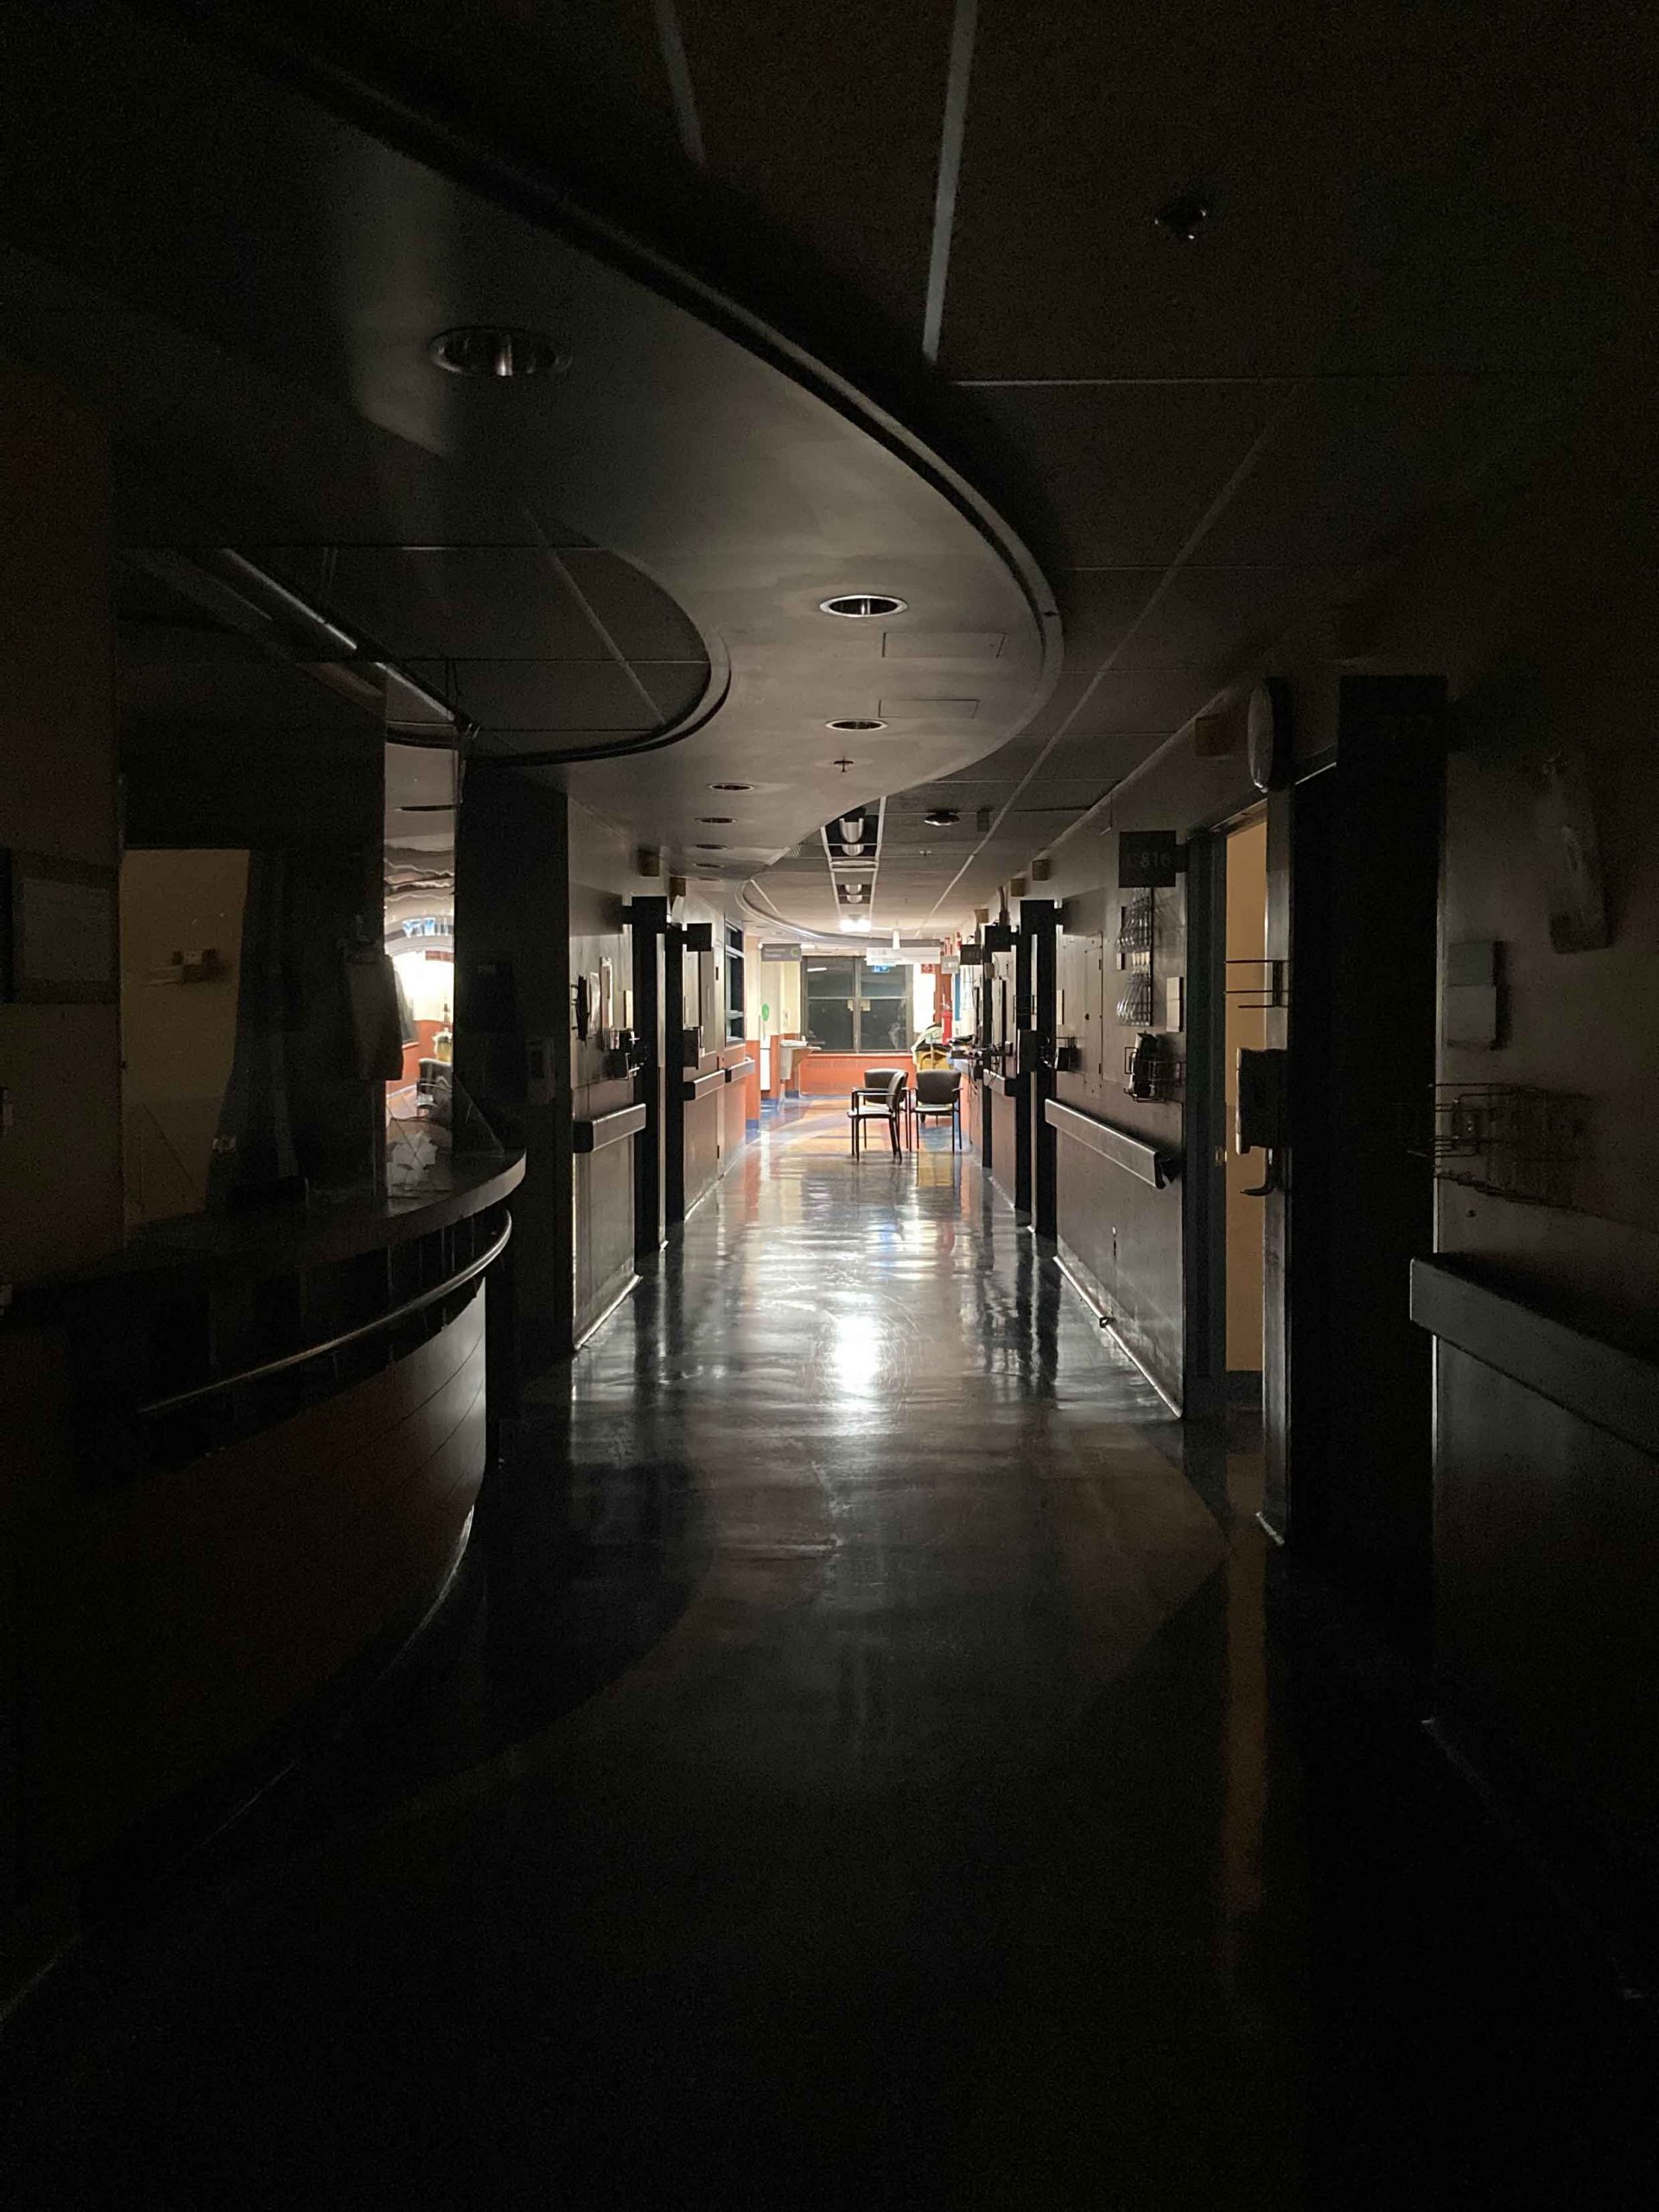 View of a hospital hallway. The lights are out in the foreground. To the left is a reception counter. The floors are shiny and reflect in the fluorescent light coming from a waiting room in the background at the other end of the hallway.